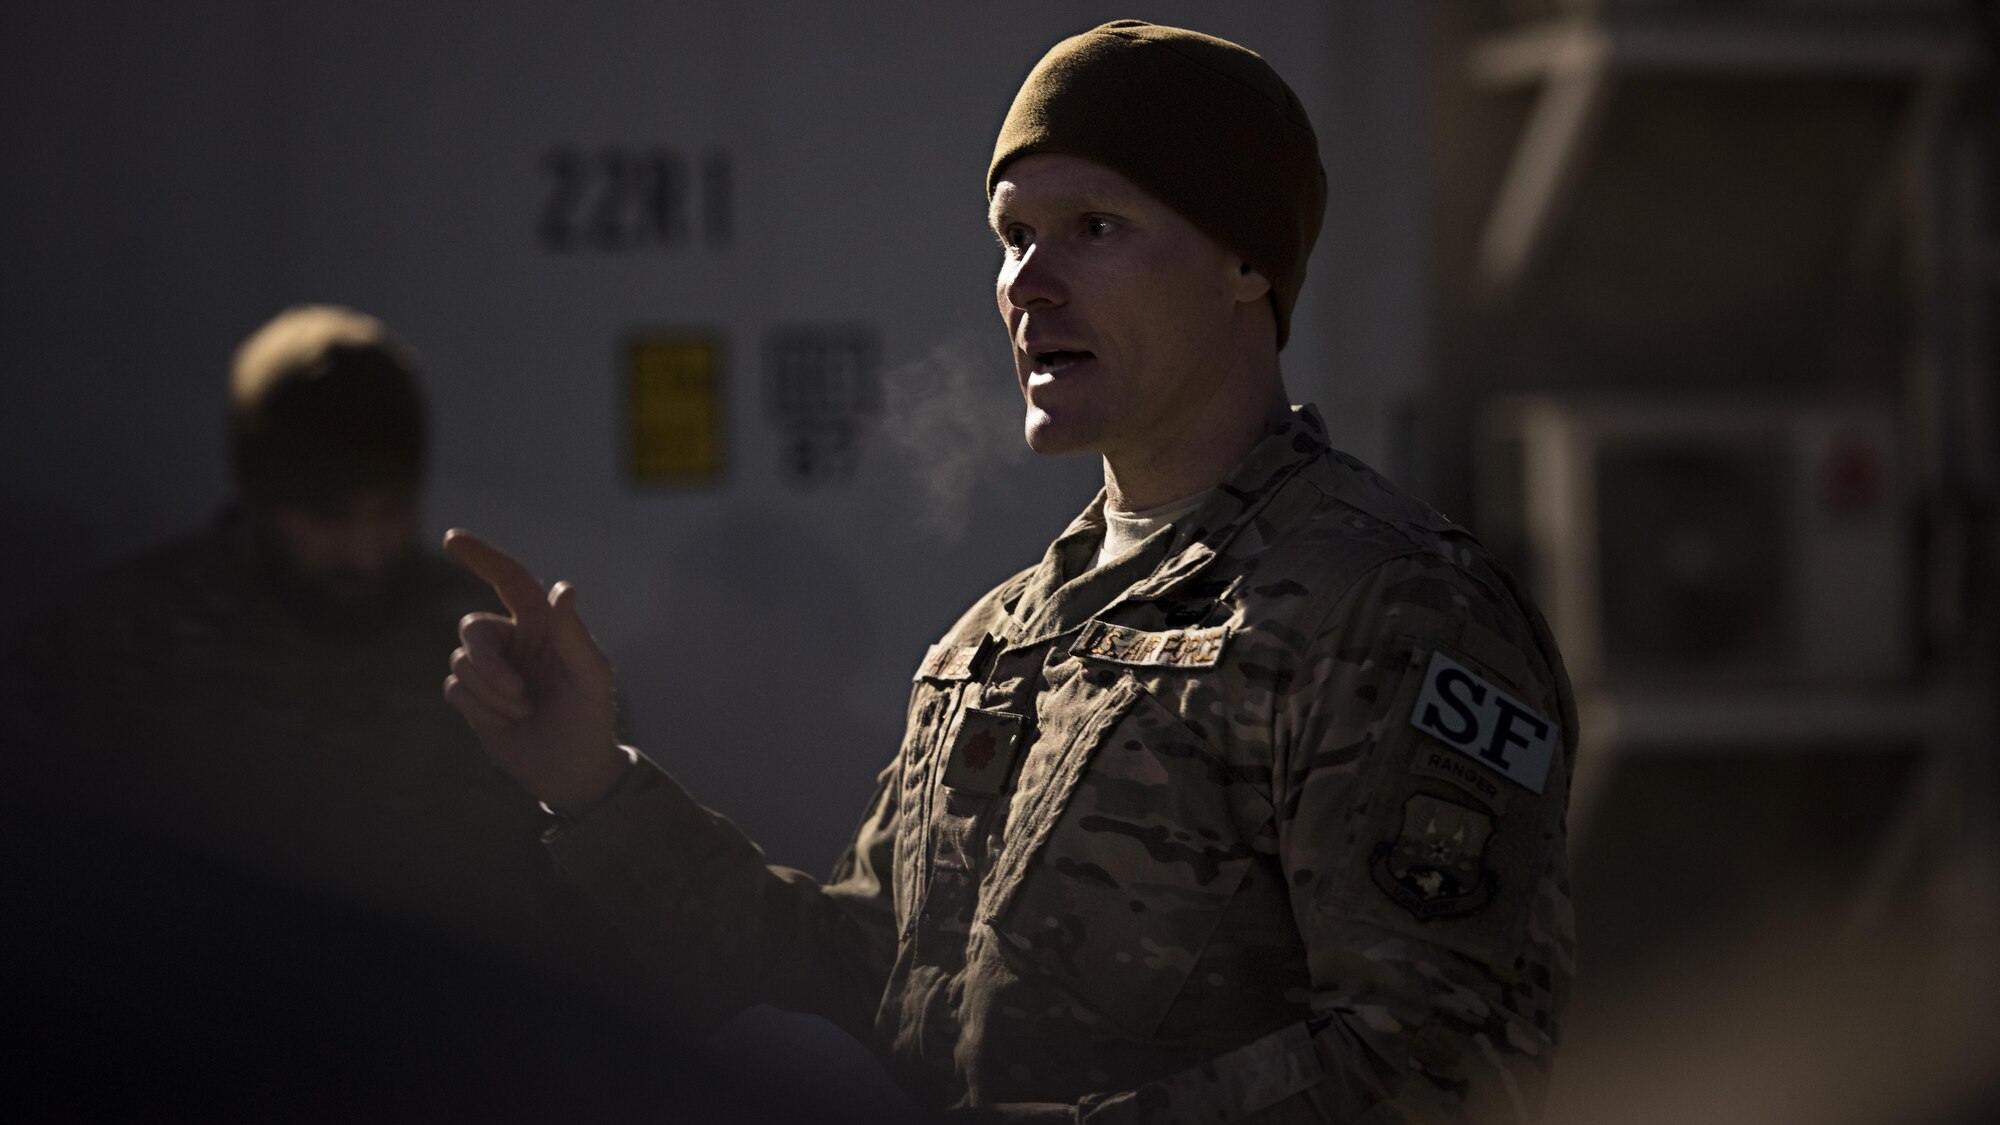 Maj. Shawn Chamberlin, 455th Expeditionary Security Forces Squadron commander, speaks to Air Force Office of Special Investigations Expeditionary Detachment 2405 and 455th ESFS members before a “Ruck March to Remember” fallen comrades Dec. 21, 2016 at Bagram Airfield, Afghanistan. The ruck march was held to honor Maj. Adrianna Vorderbruggen, Staff Sgt. Michael Cinco, Staff Sgt. Peter Taub, Staff Sgt. Chester McBride, Tech. Sgt. Joseph Lemm and Staff Sgt. Louis Bonacasa. (U.S. Air Force photo by Staff Sgt. Katherine Spessa)